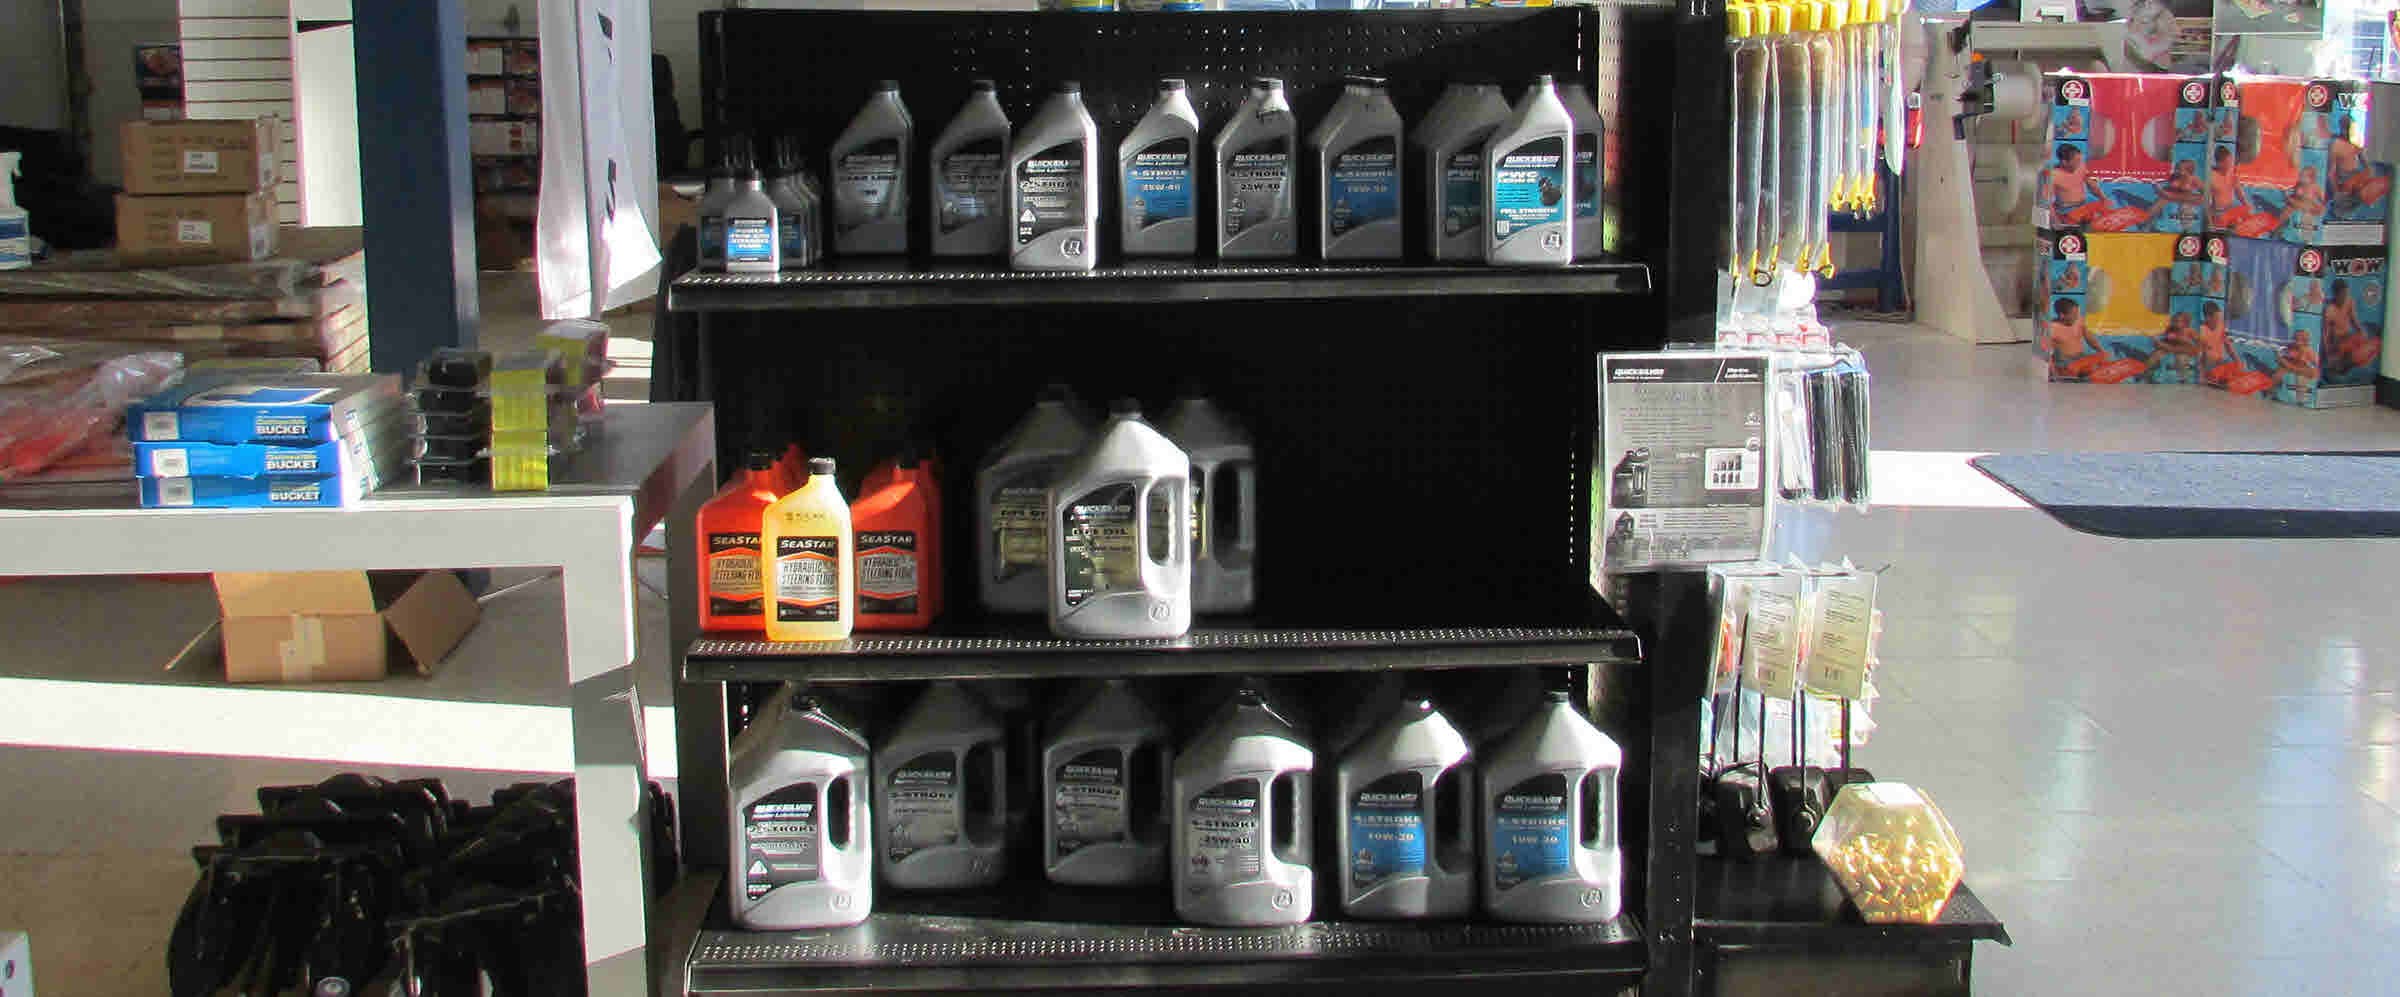 <p>VARIETY OF OIL AND LUBRICANTS</p>
